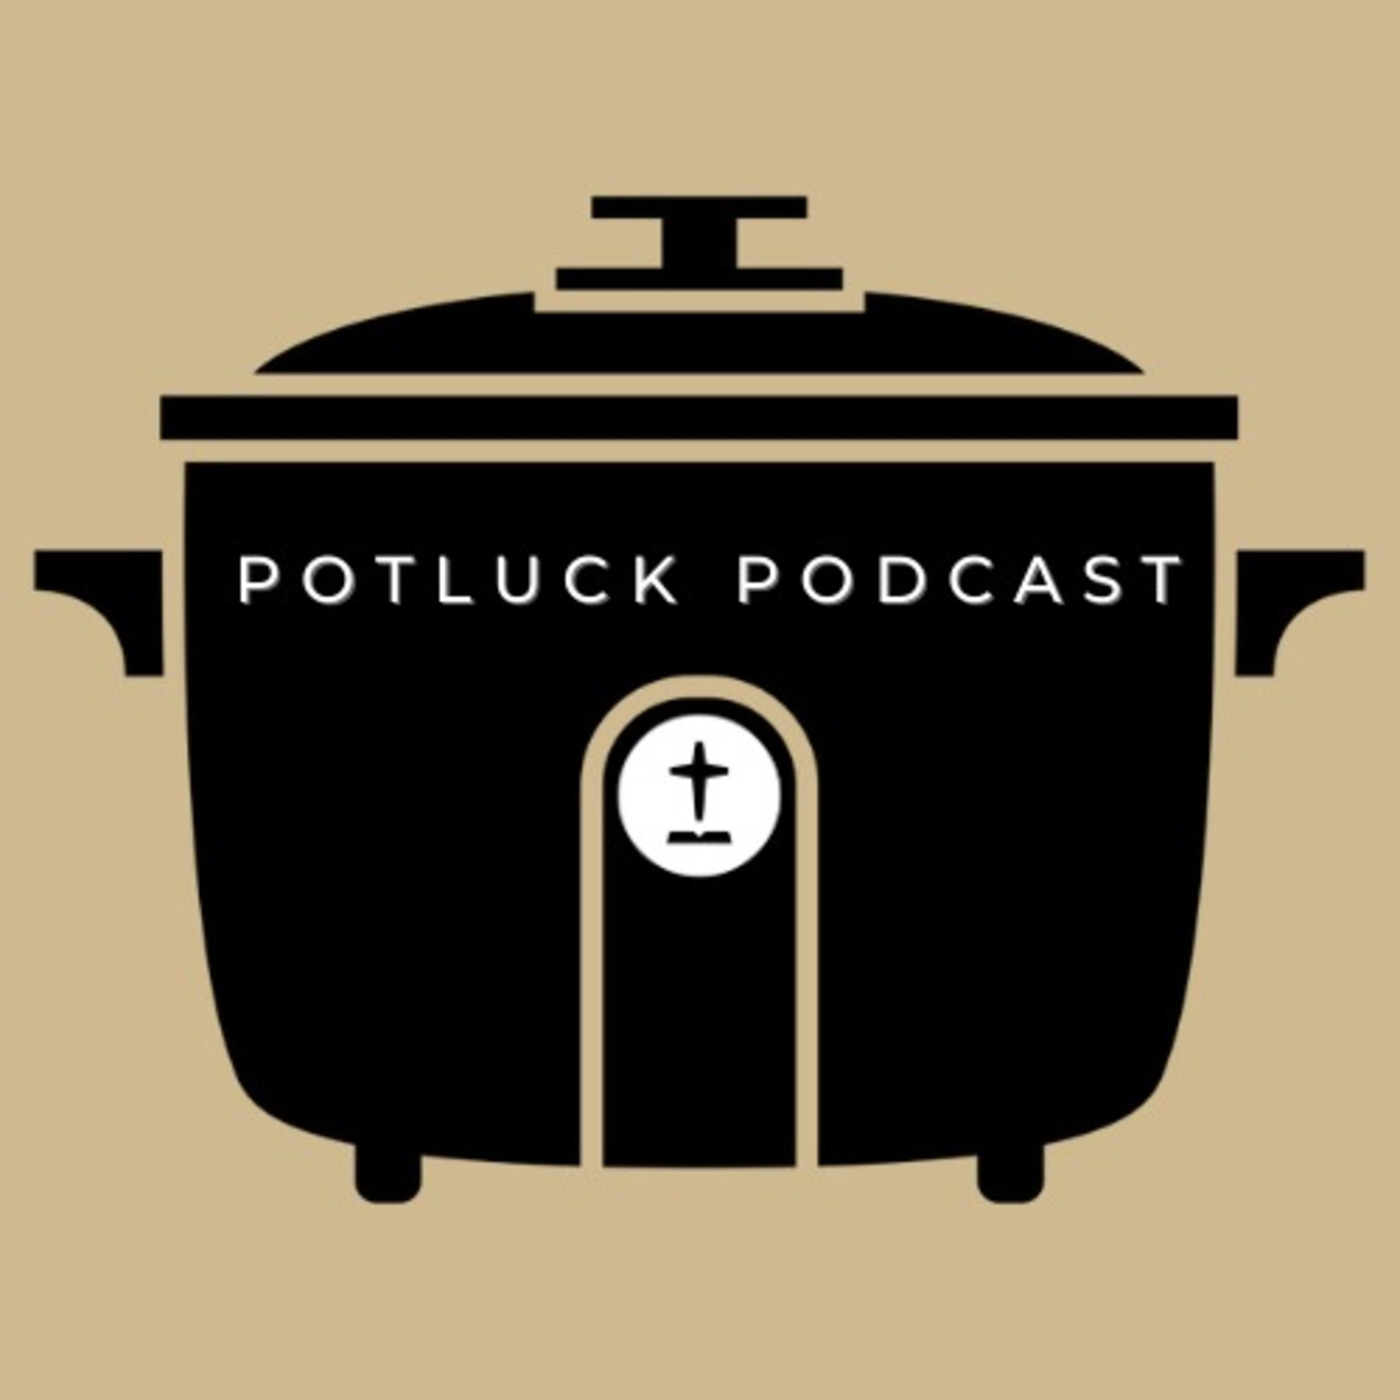 Episode 277: POTLUCK PODCAST 197: Updated Requirements in Anaheim, Dickard Nomination, and Oysters